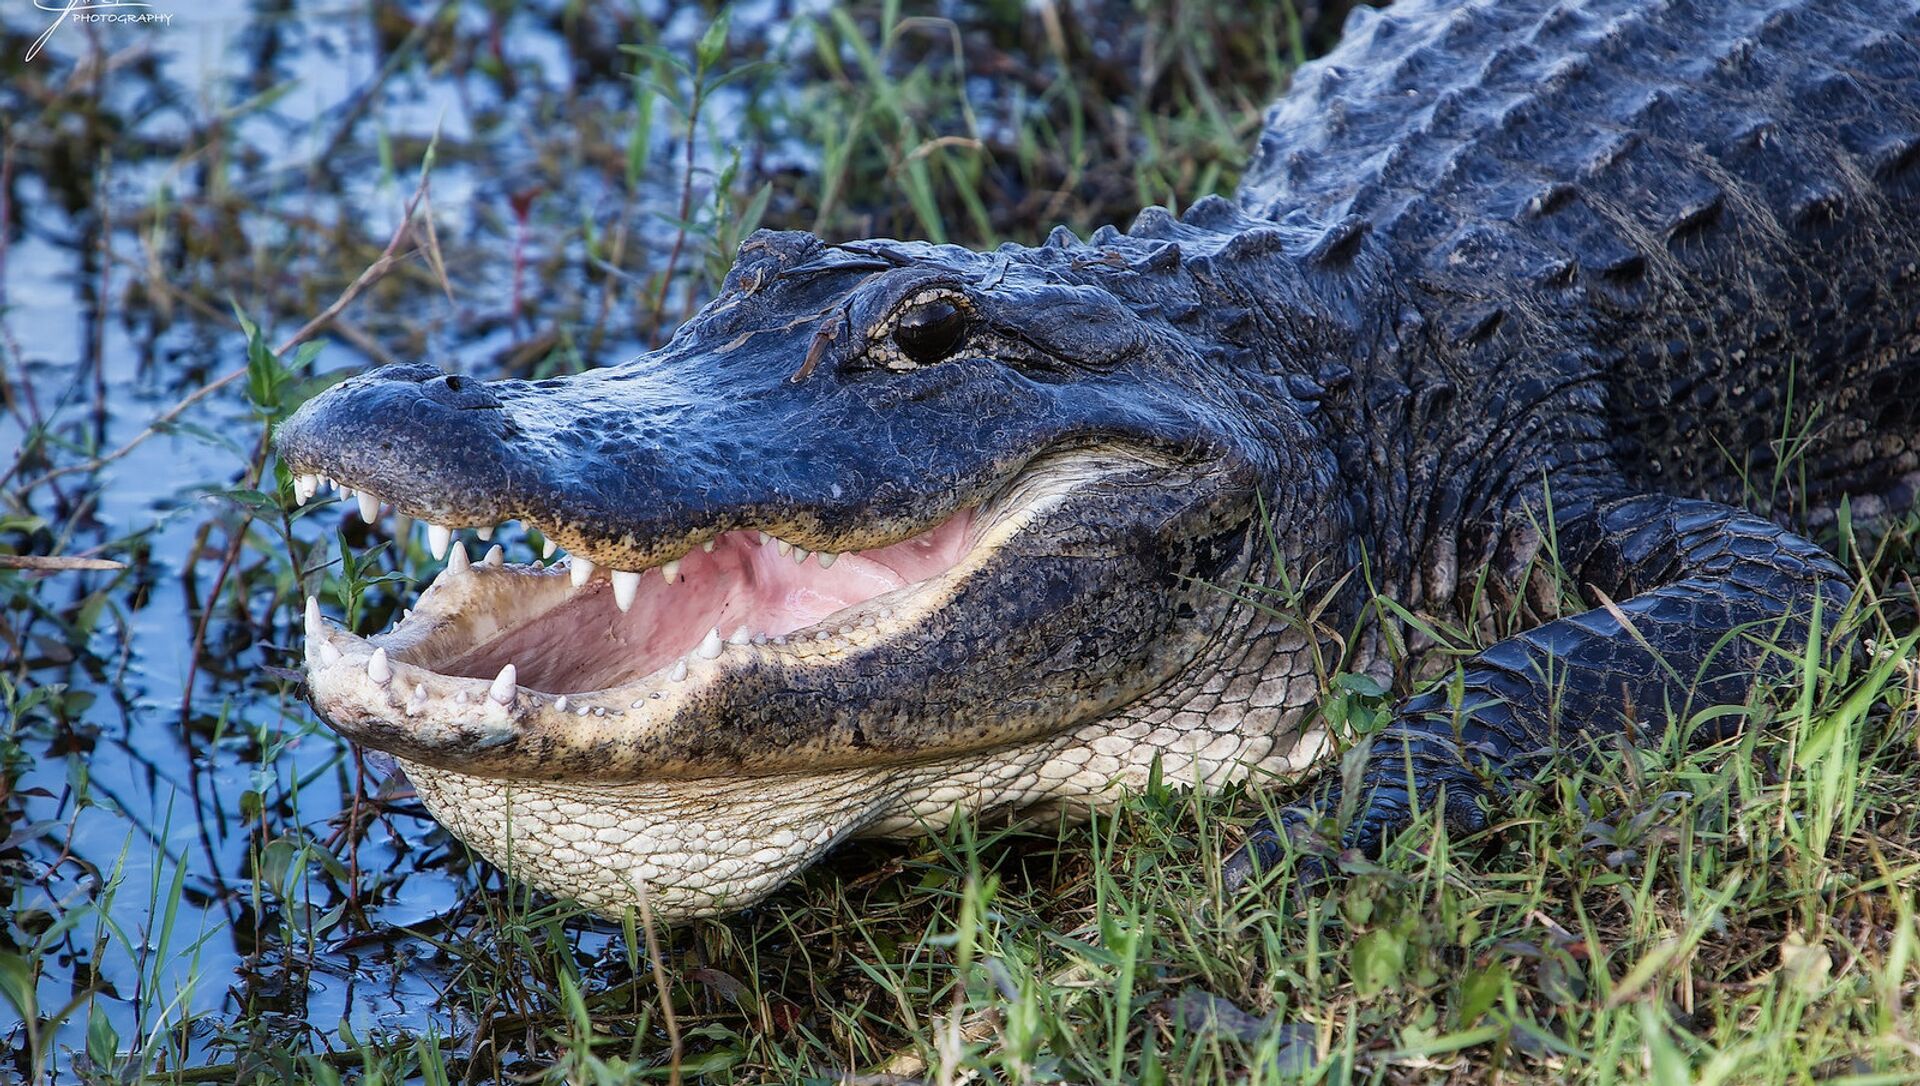 8-Foot Alligator Found in Florida With Man's Body in Its Mouth - Sputnik International, 1920, 10.07.2021